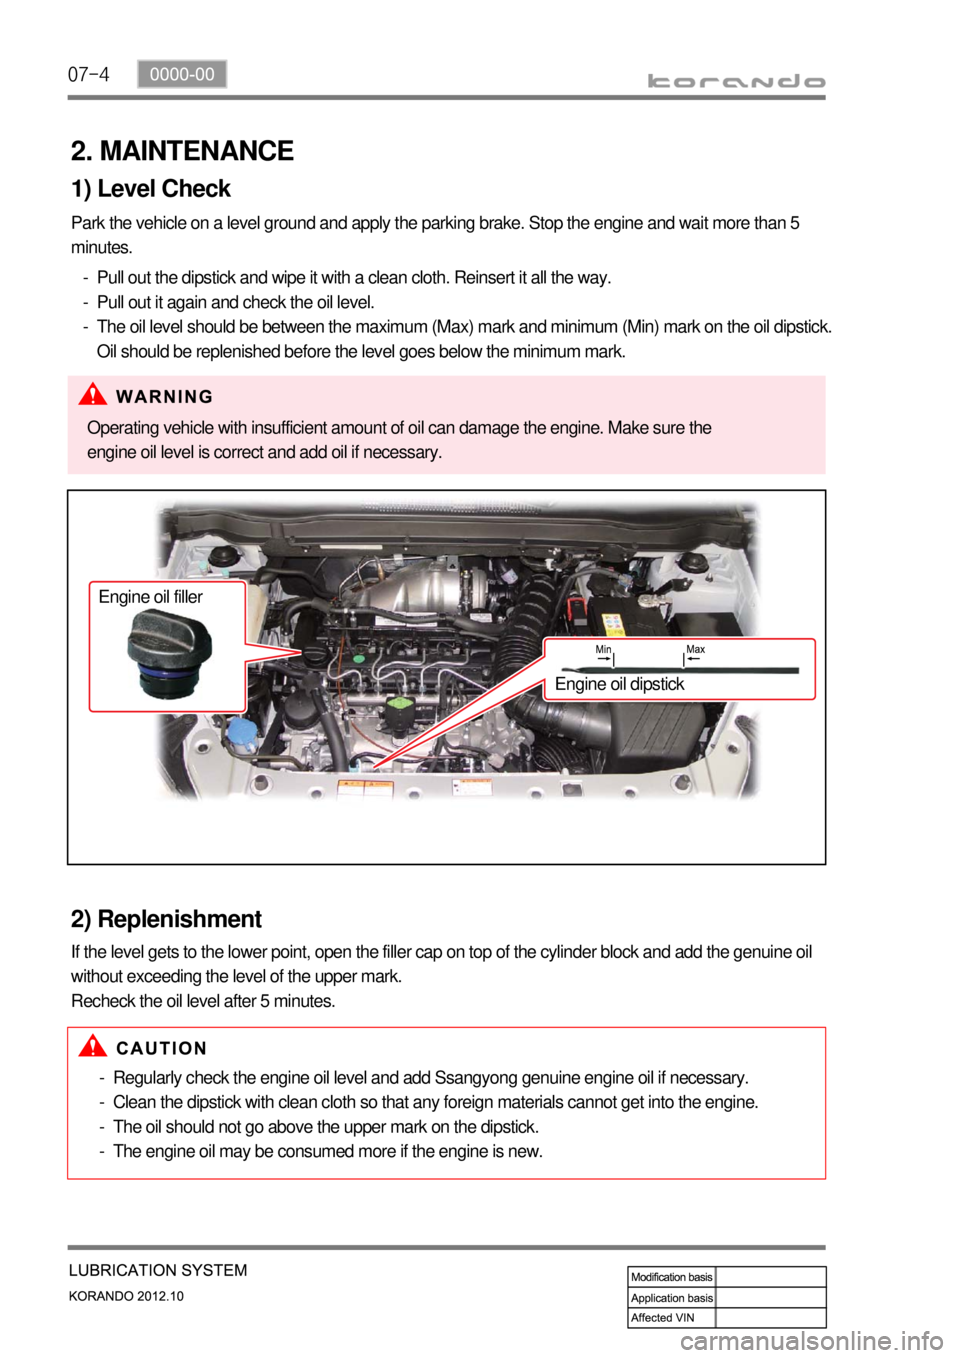 SSANGYONG KORANDO 2012  Service Manual 07-4
2. MAINTENANCE
1) Level Check
Park the vehicle on a level ground and apply the parking brake. Stop the engine and wait more than 5 
minutes.
Pull out the dipstick and wipe it with a clean cloth. 